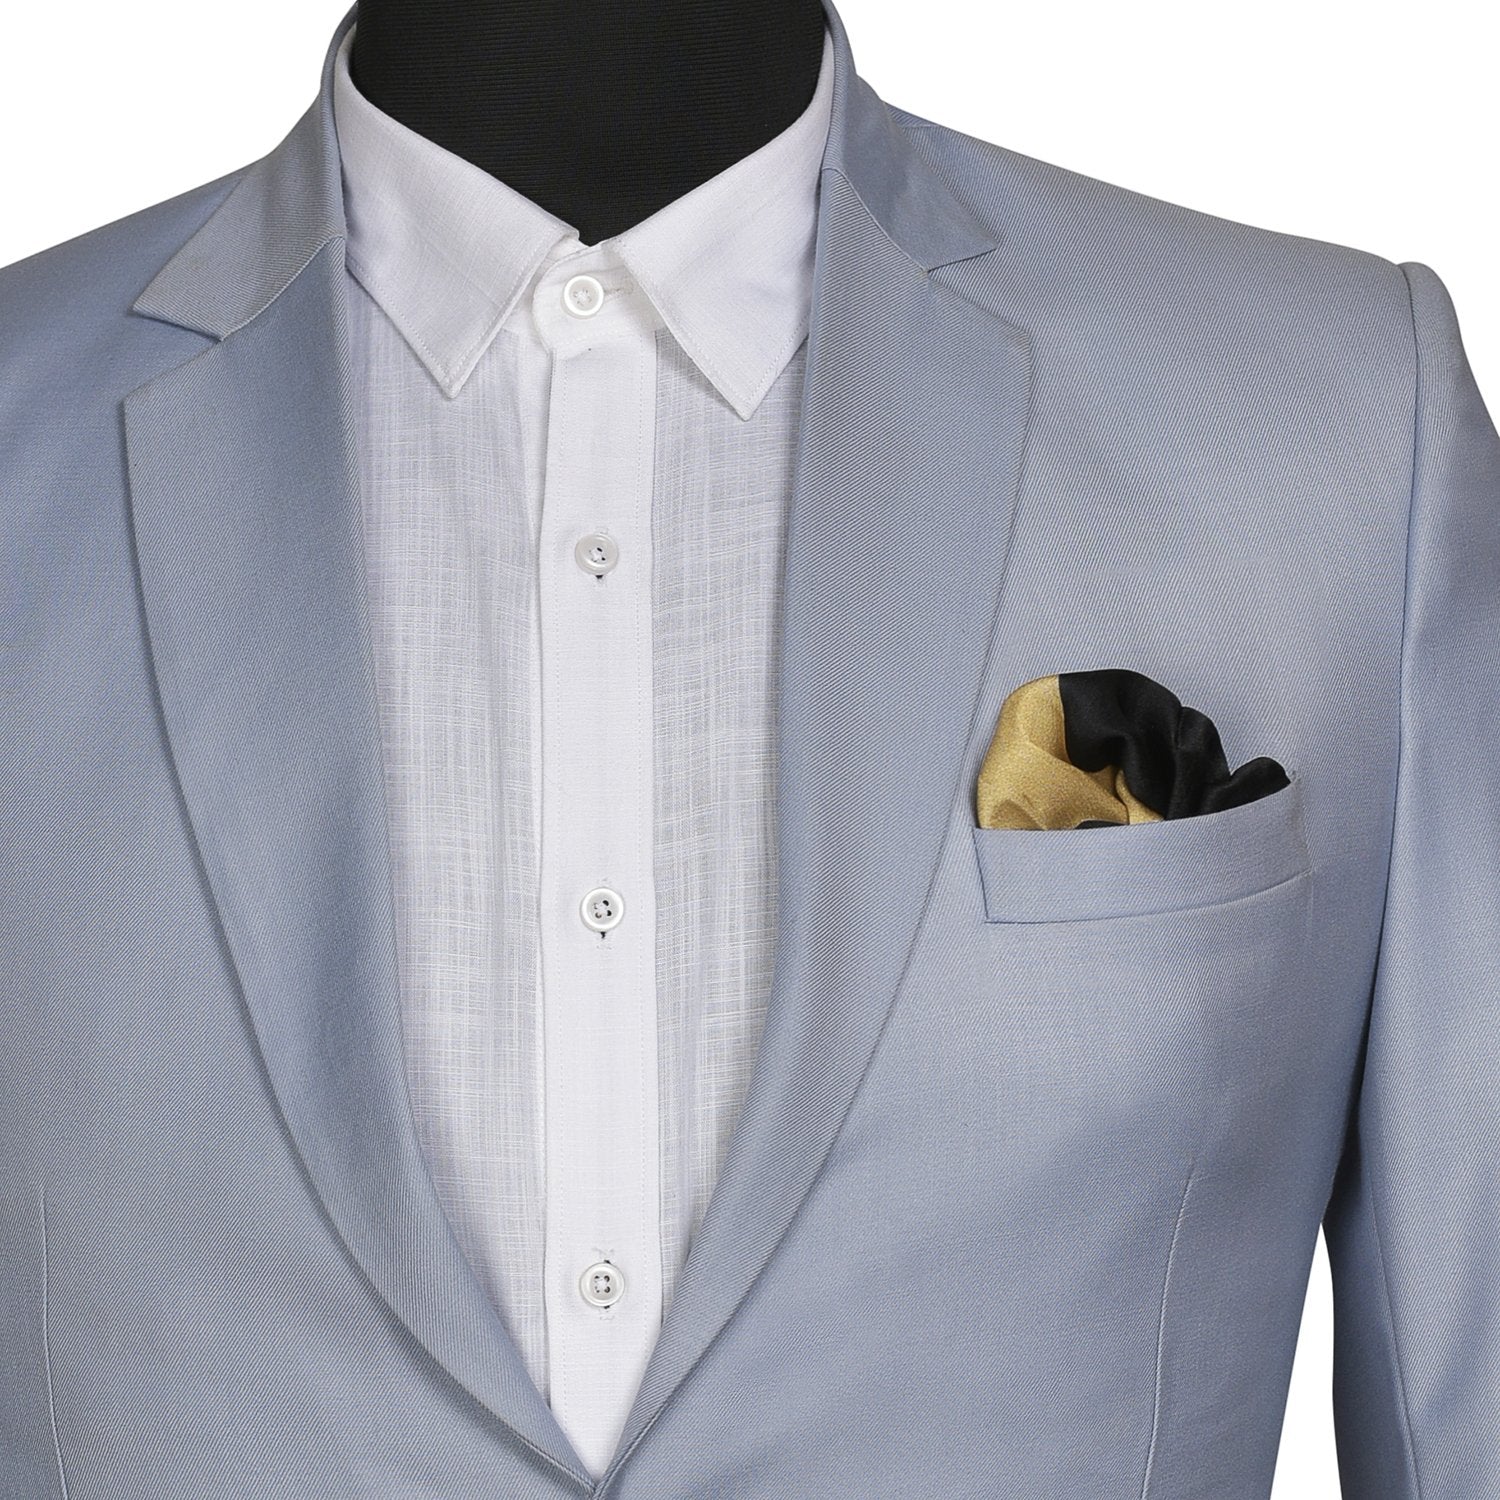 Chokore 2-in-1 Beige & Black Silk Pocket Square from the Solids Line